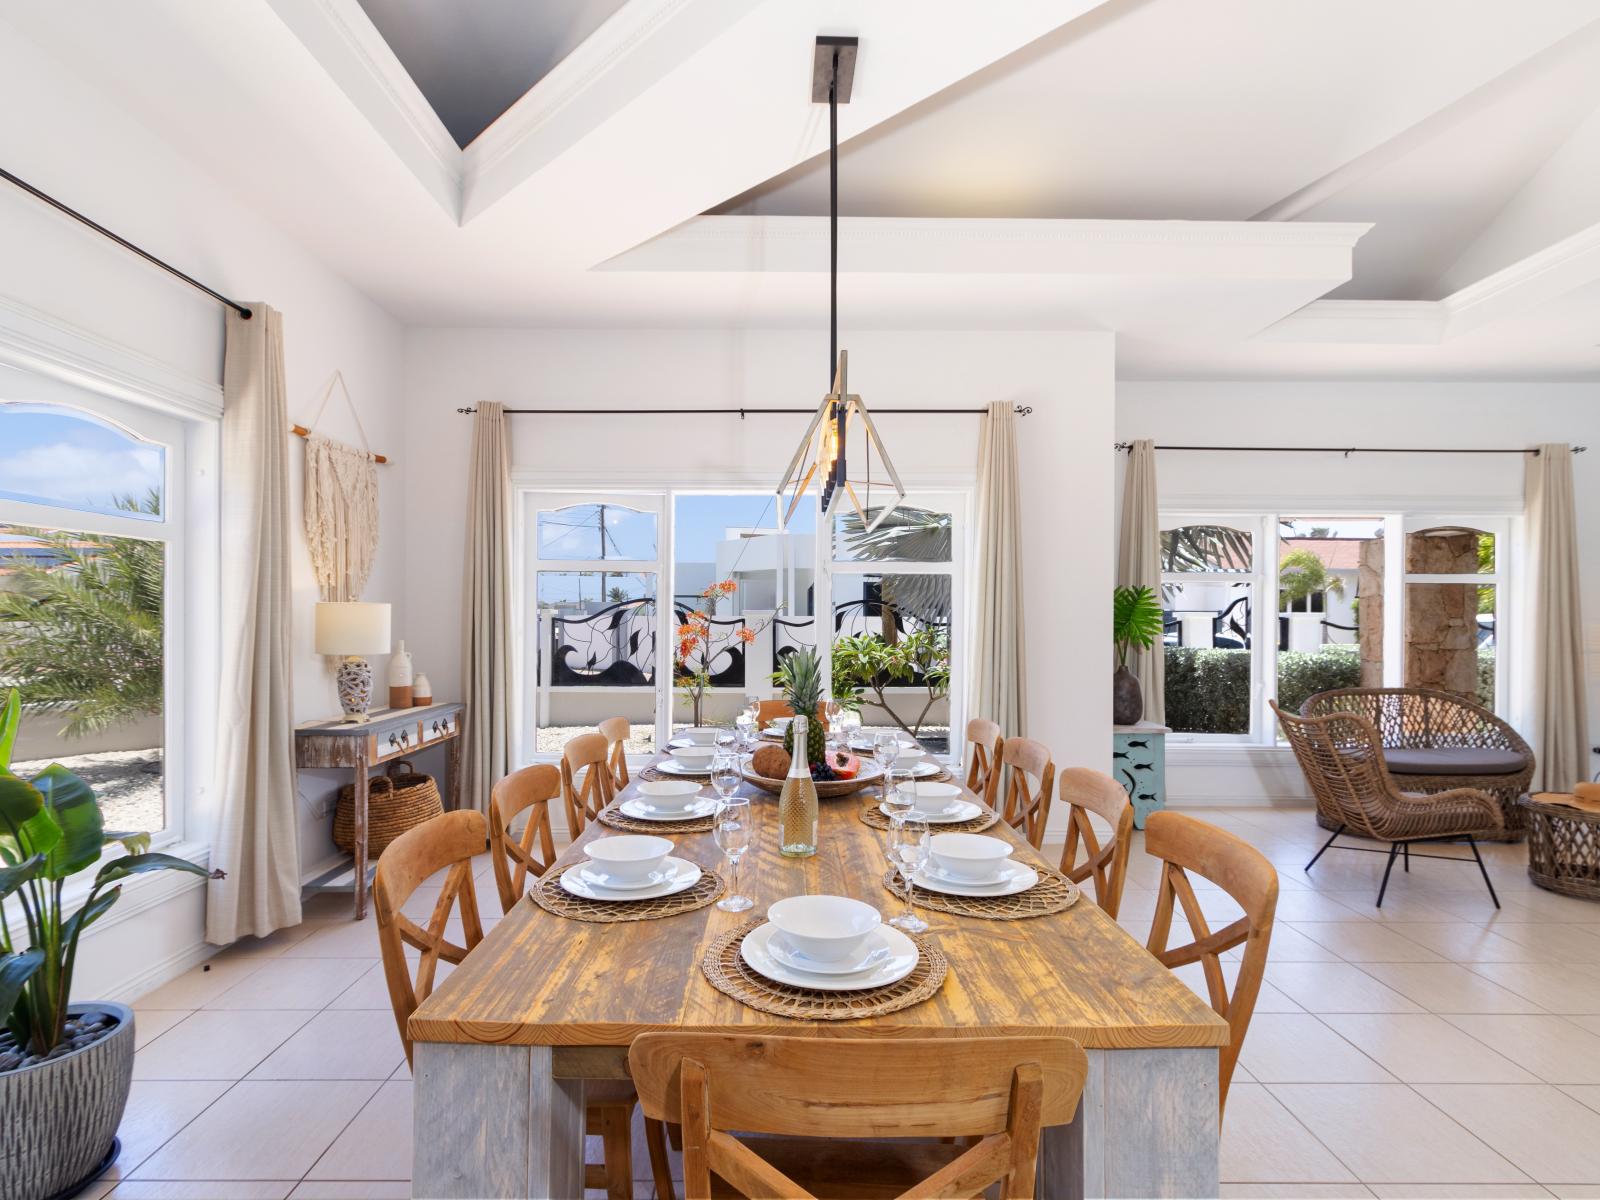 Elegant Dining Area of the Apartment in Noord Aruba - 10 Persons Dining - Thoughtful lighting fixtures creating an intimate and inviting atmosphere - Artfully arranged table settings for a touch of elegance